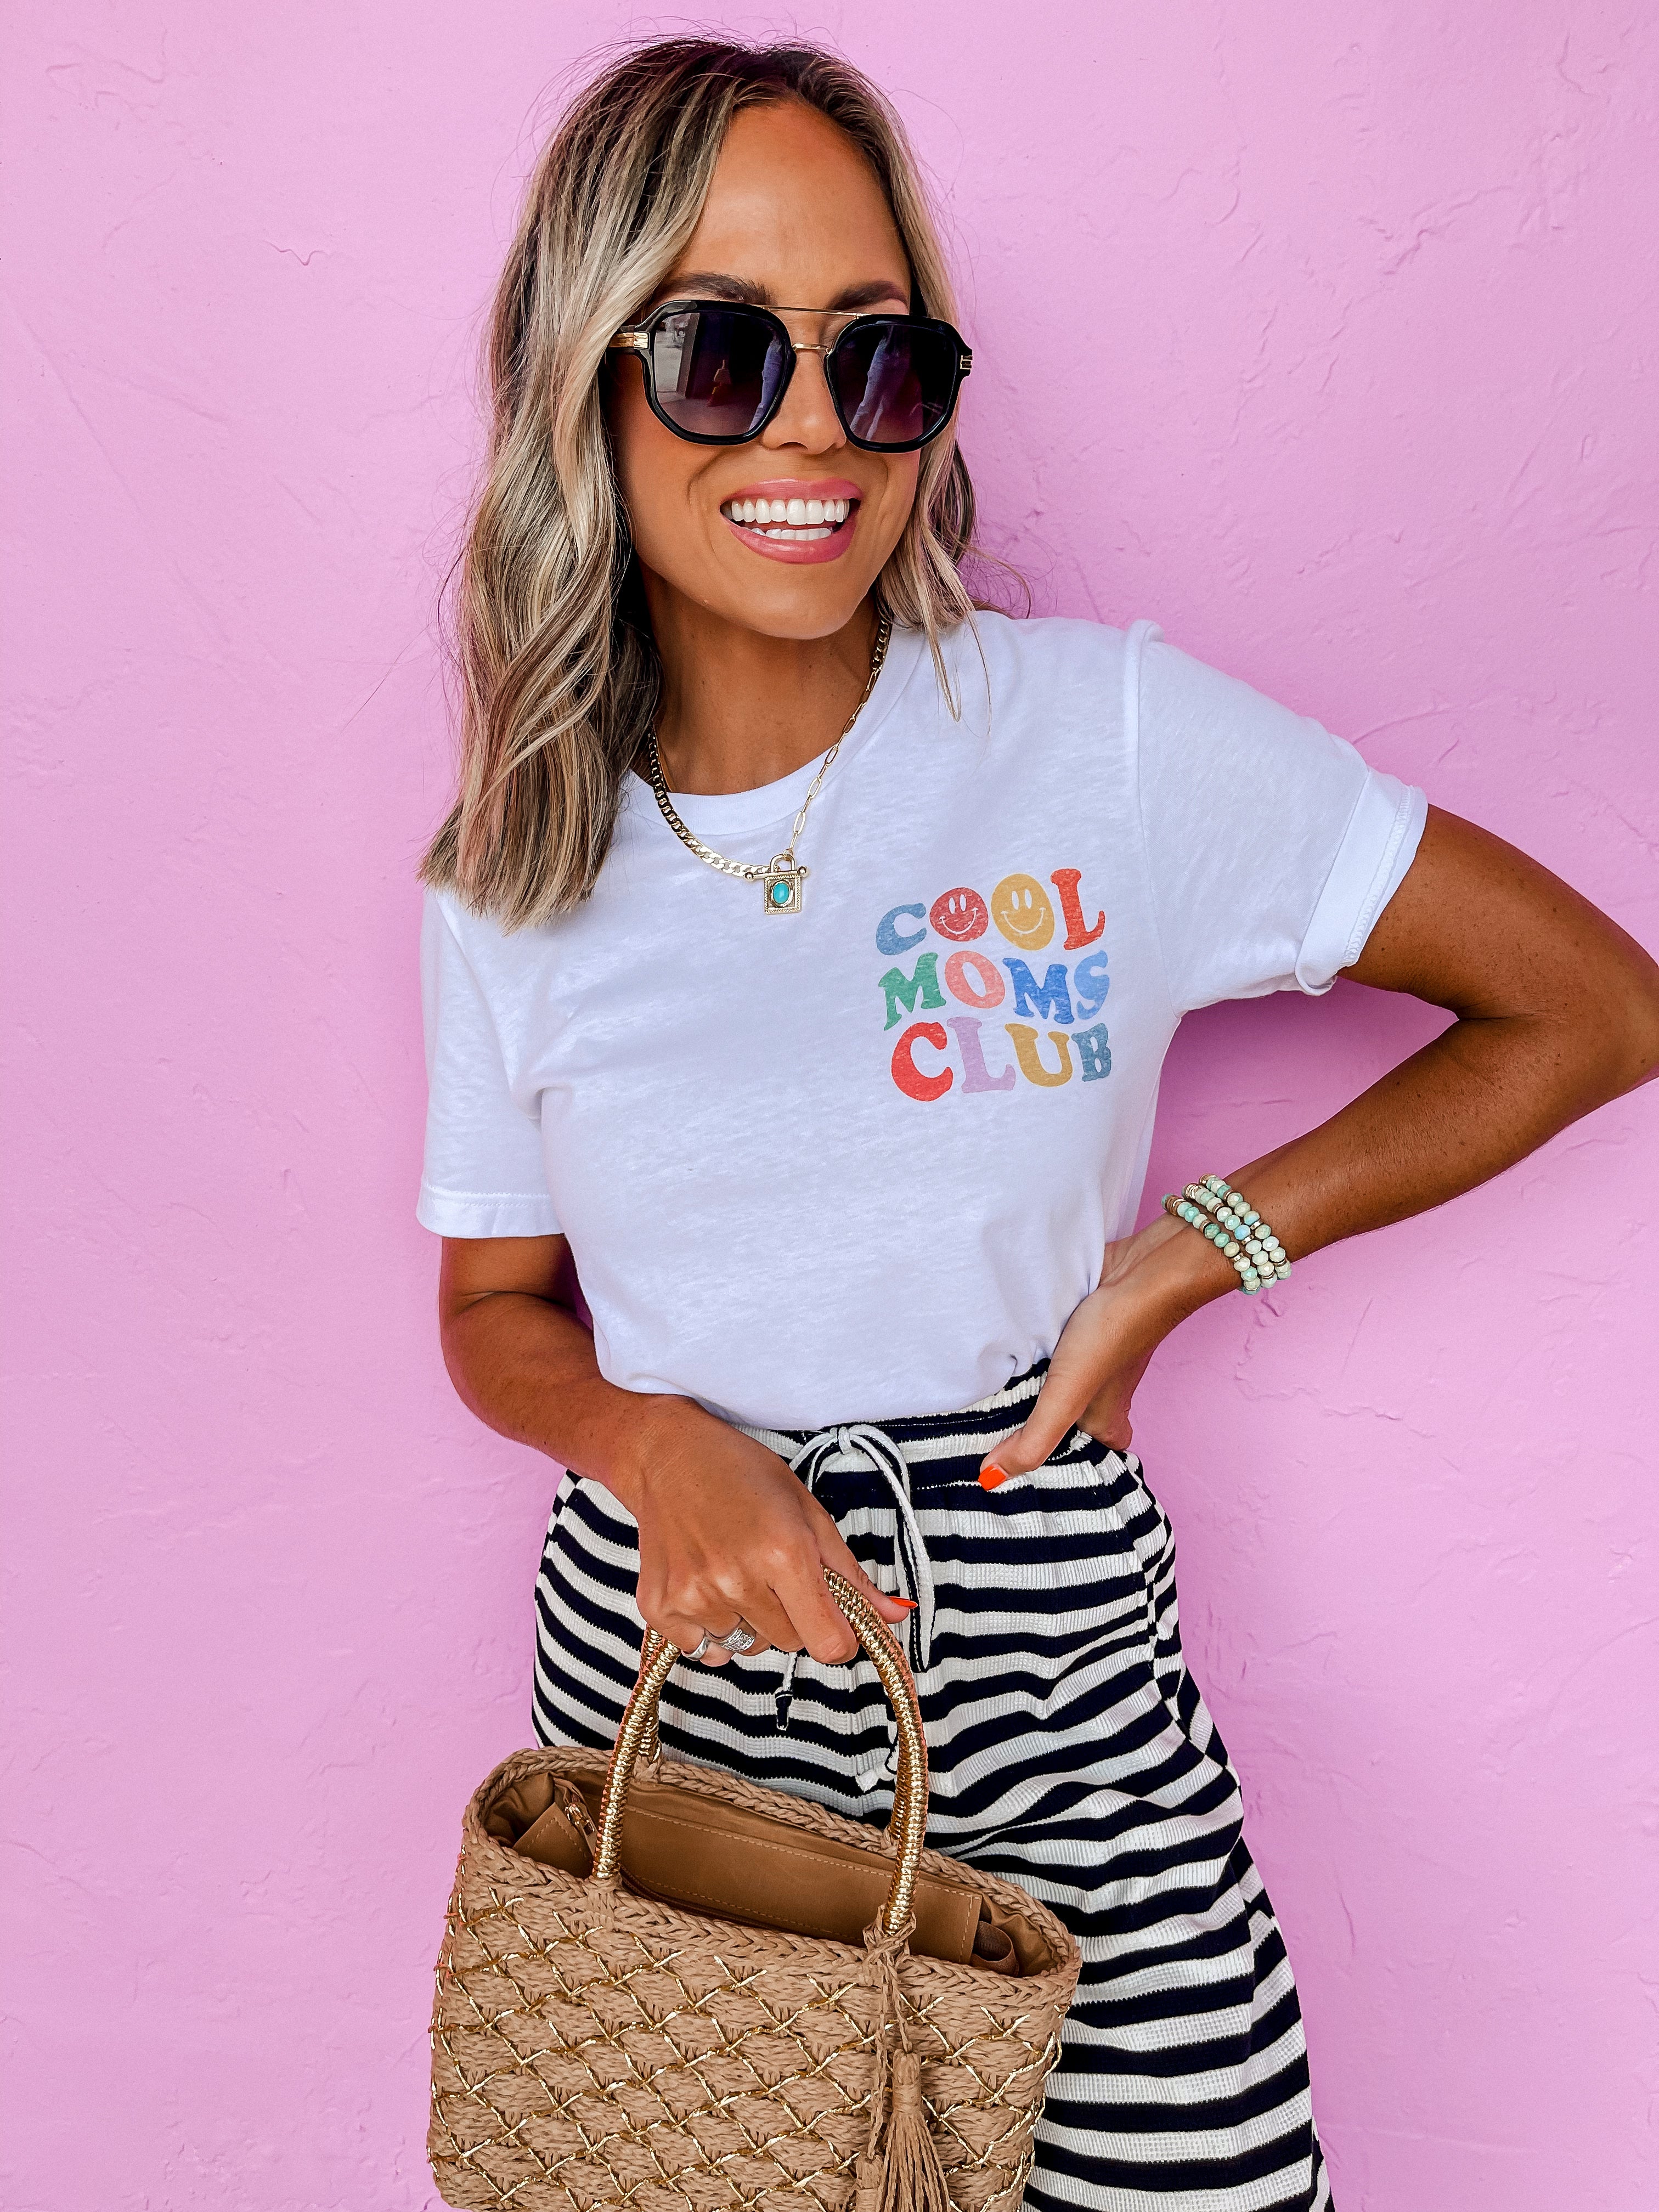 Cool Moms Club Graphic Tee